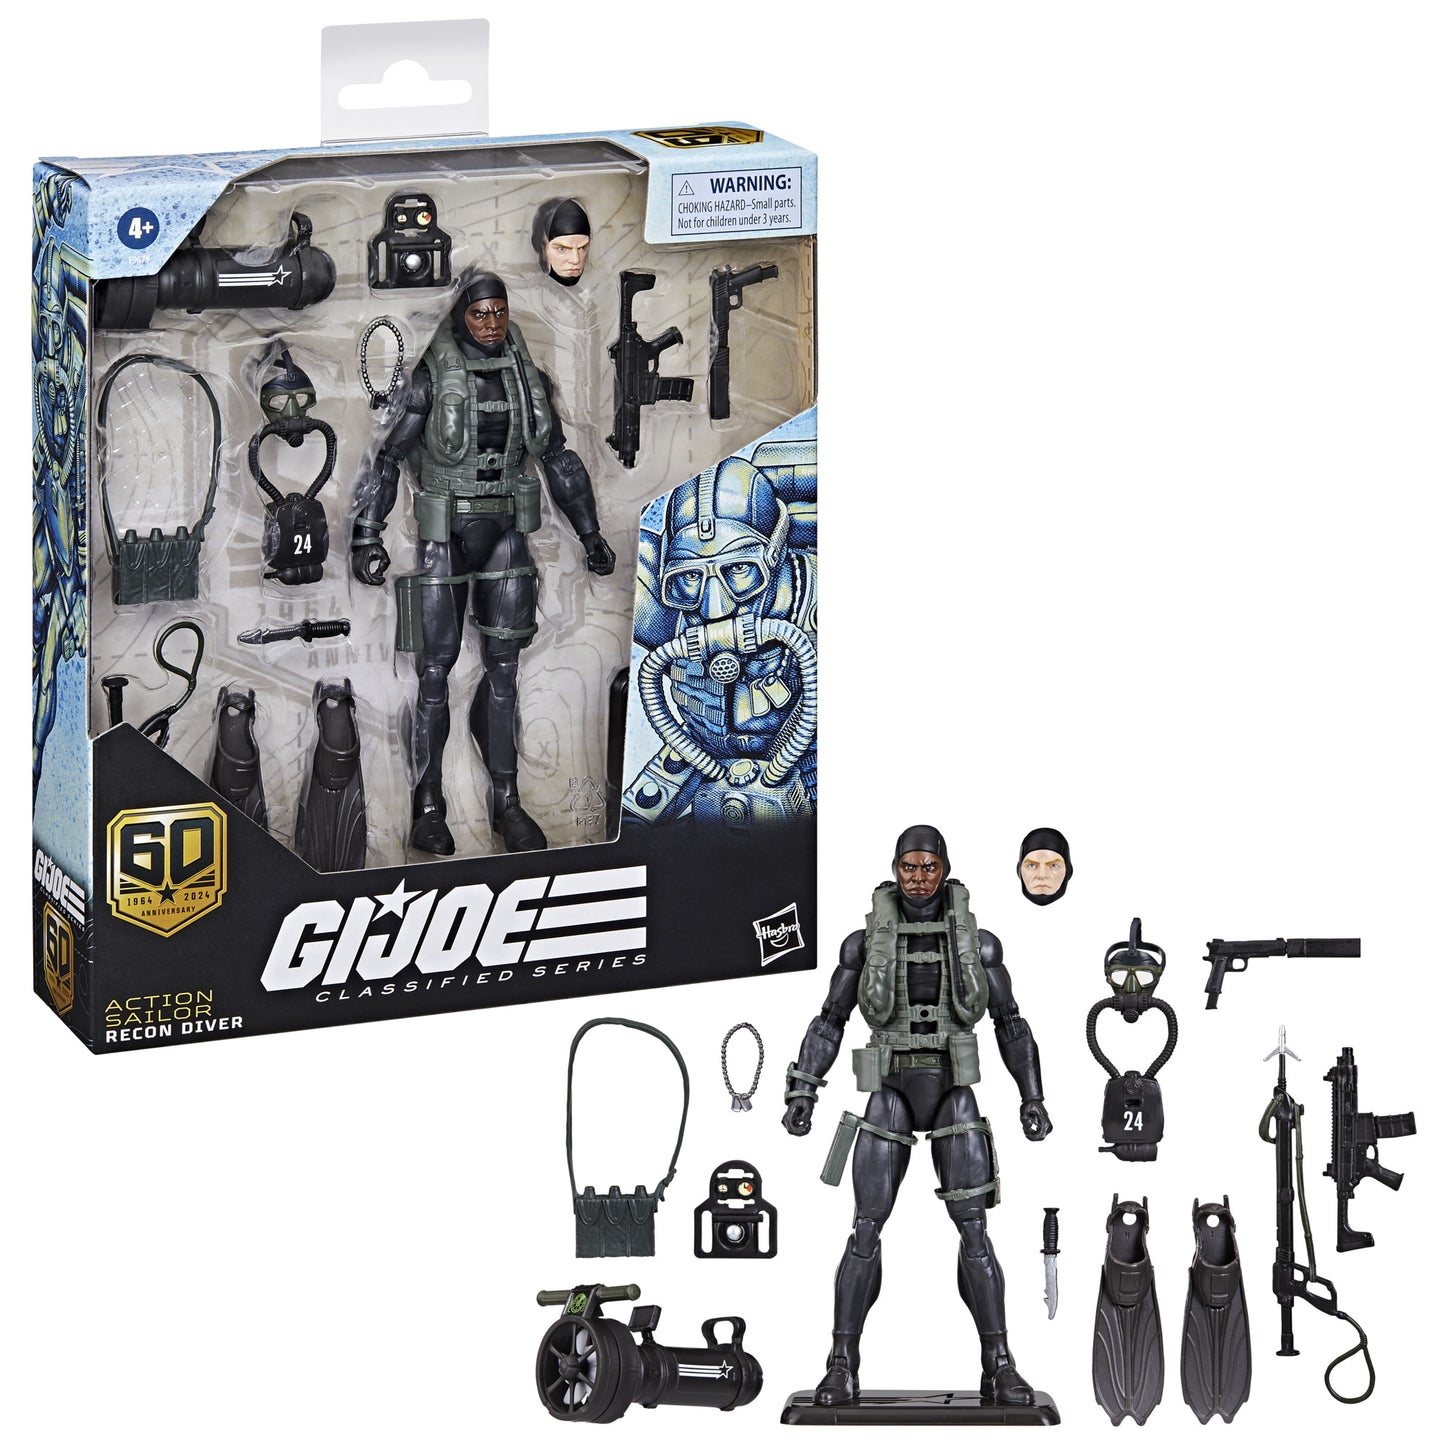 G.I. Joe Classified 60th Anniversary Action Sailor Recon Diver 6in Action Figure